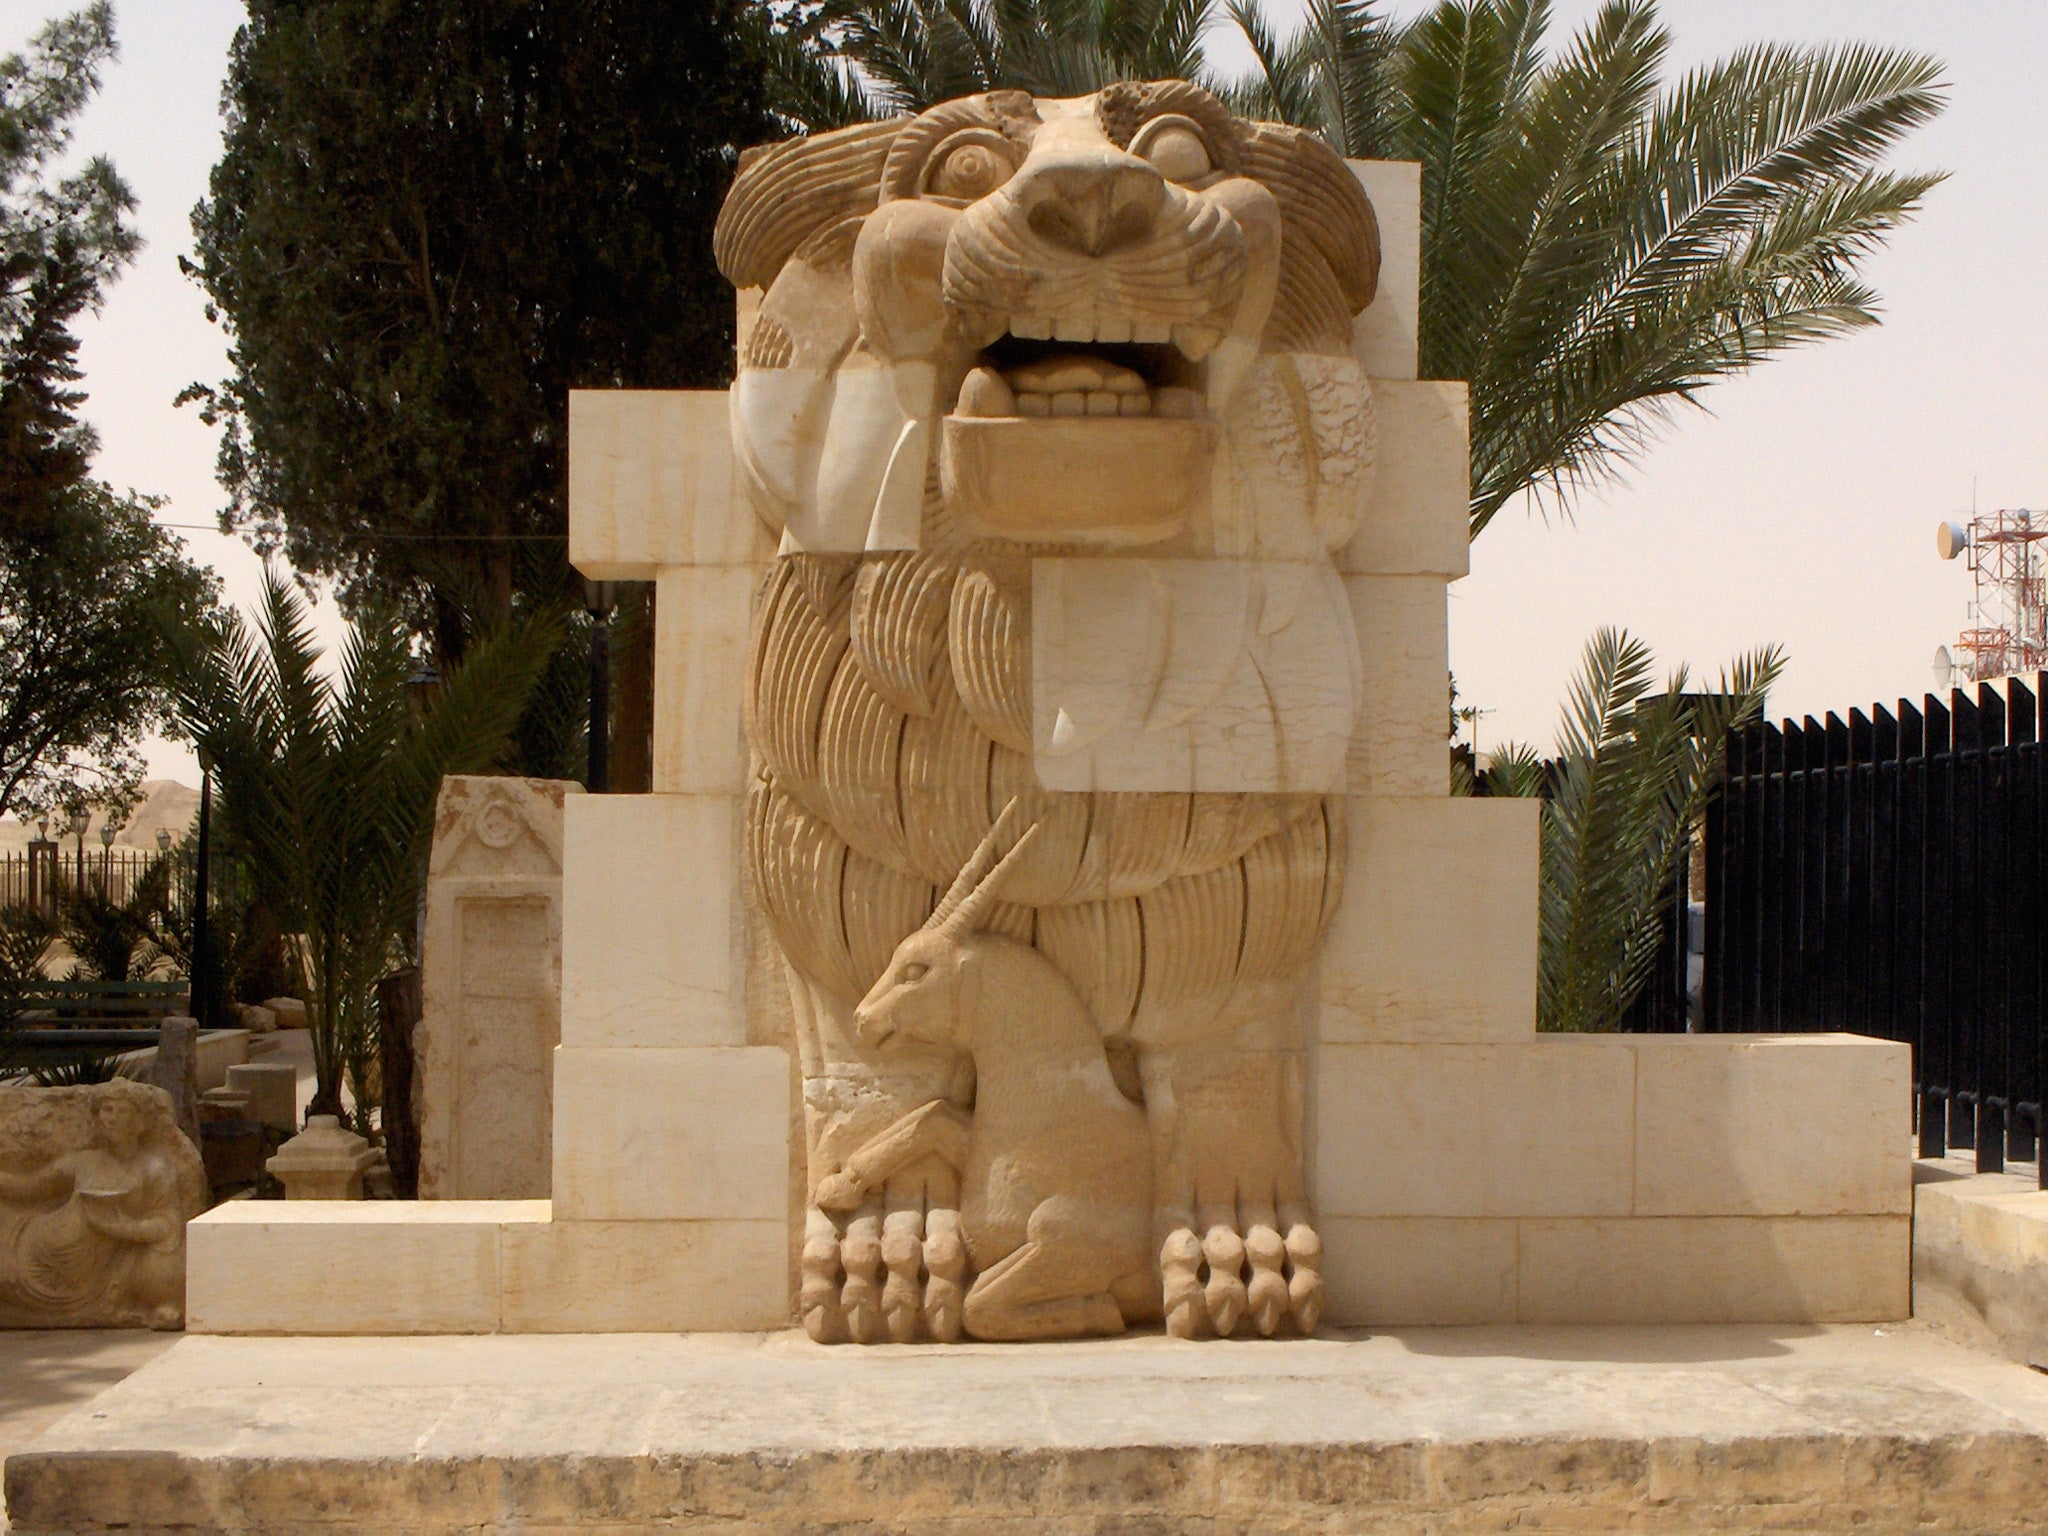 The lion of al-lat statue in the ancient city of Palmyra, Syria, prior to its destruction